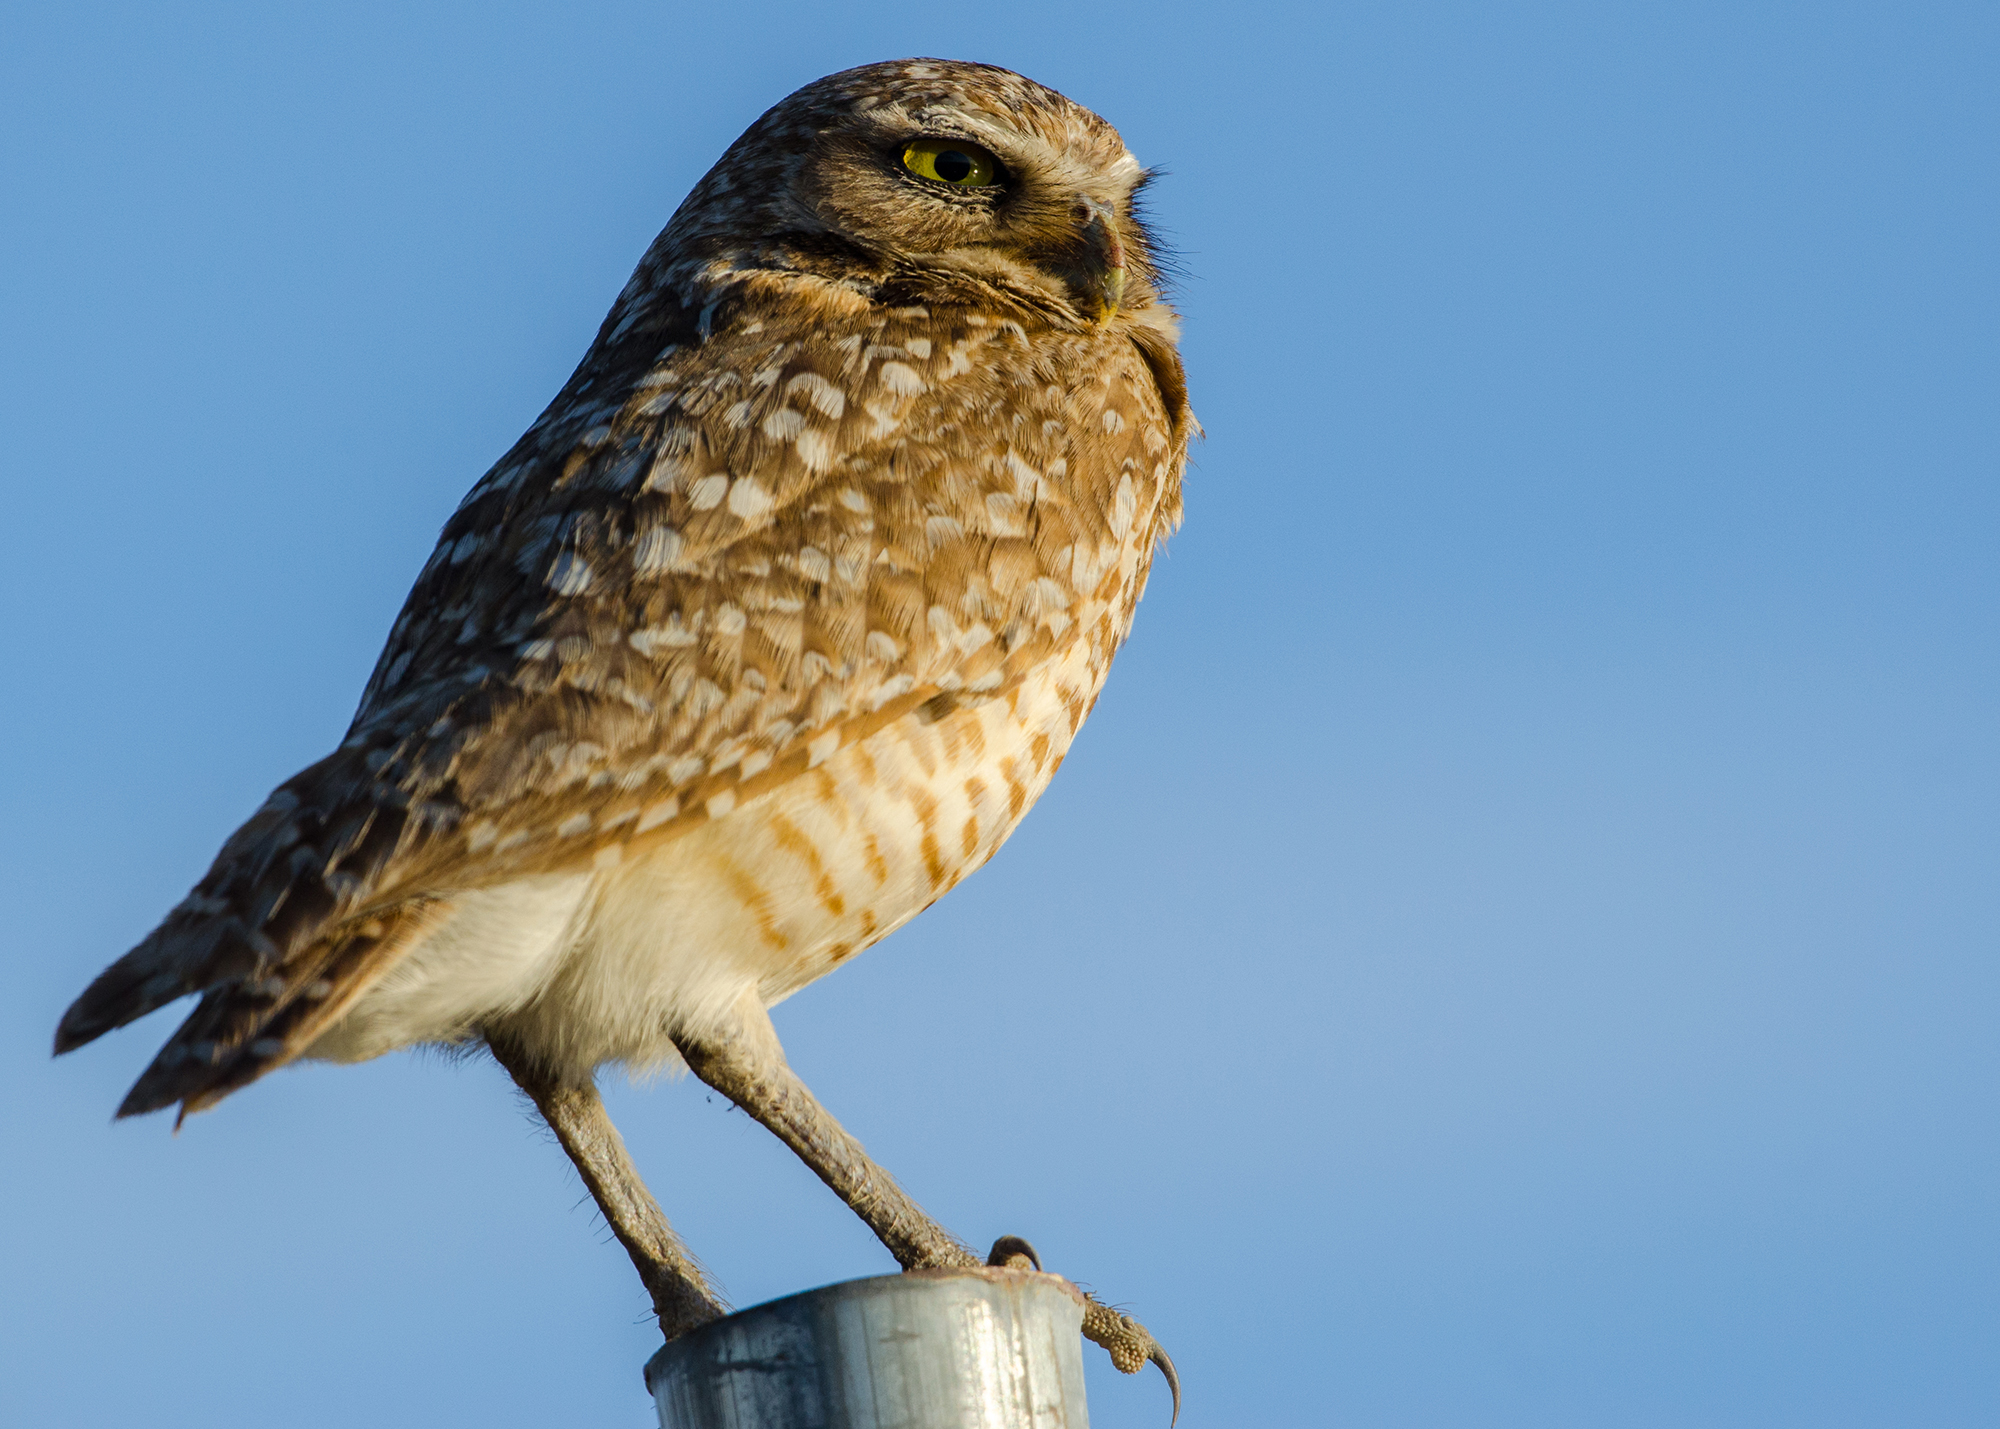 A Burrowing Owl in the Boroughs